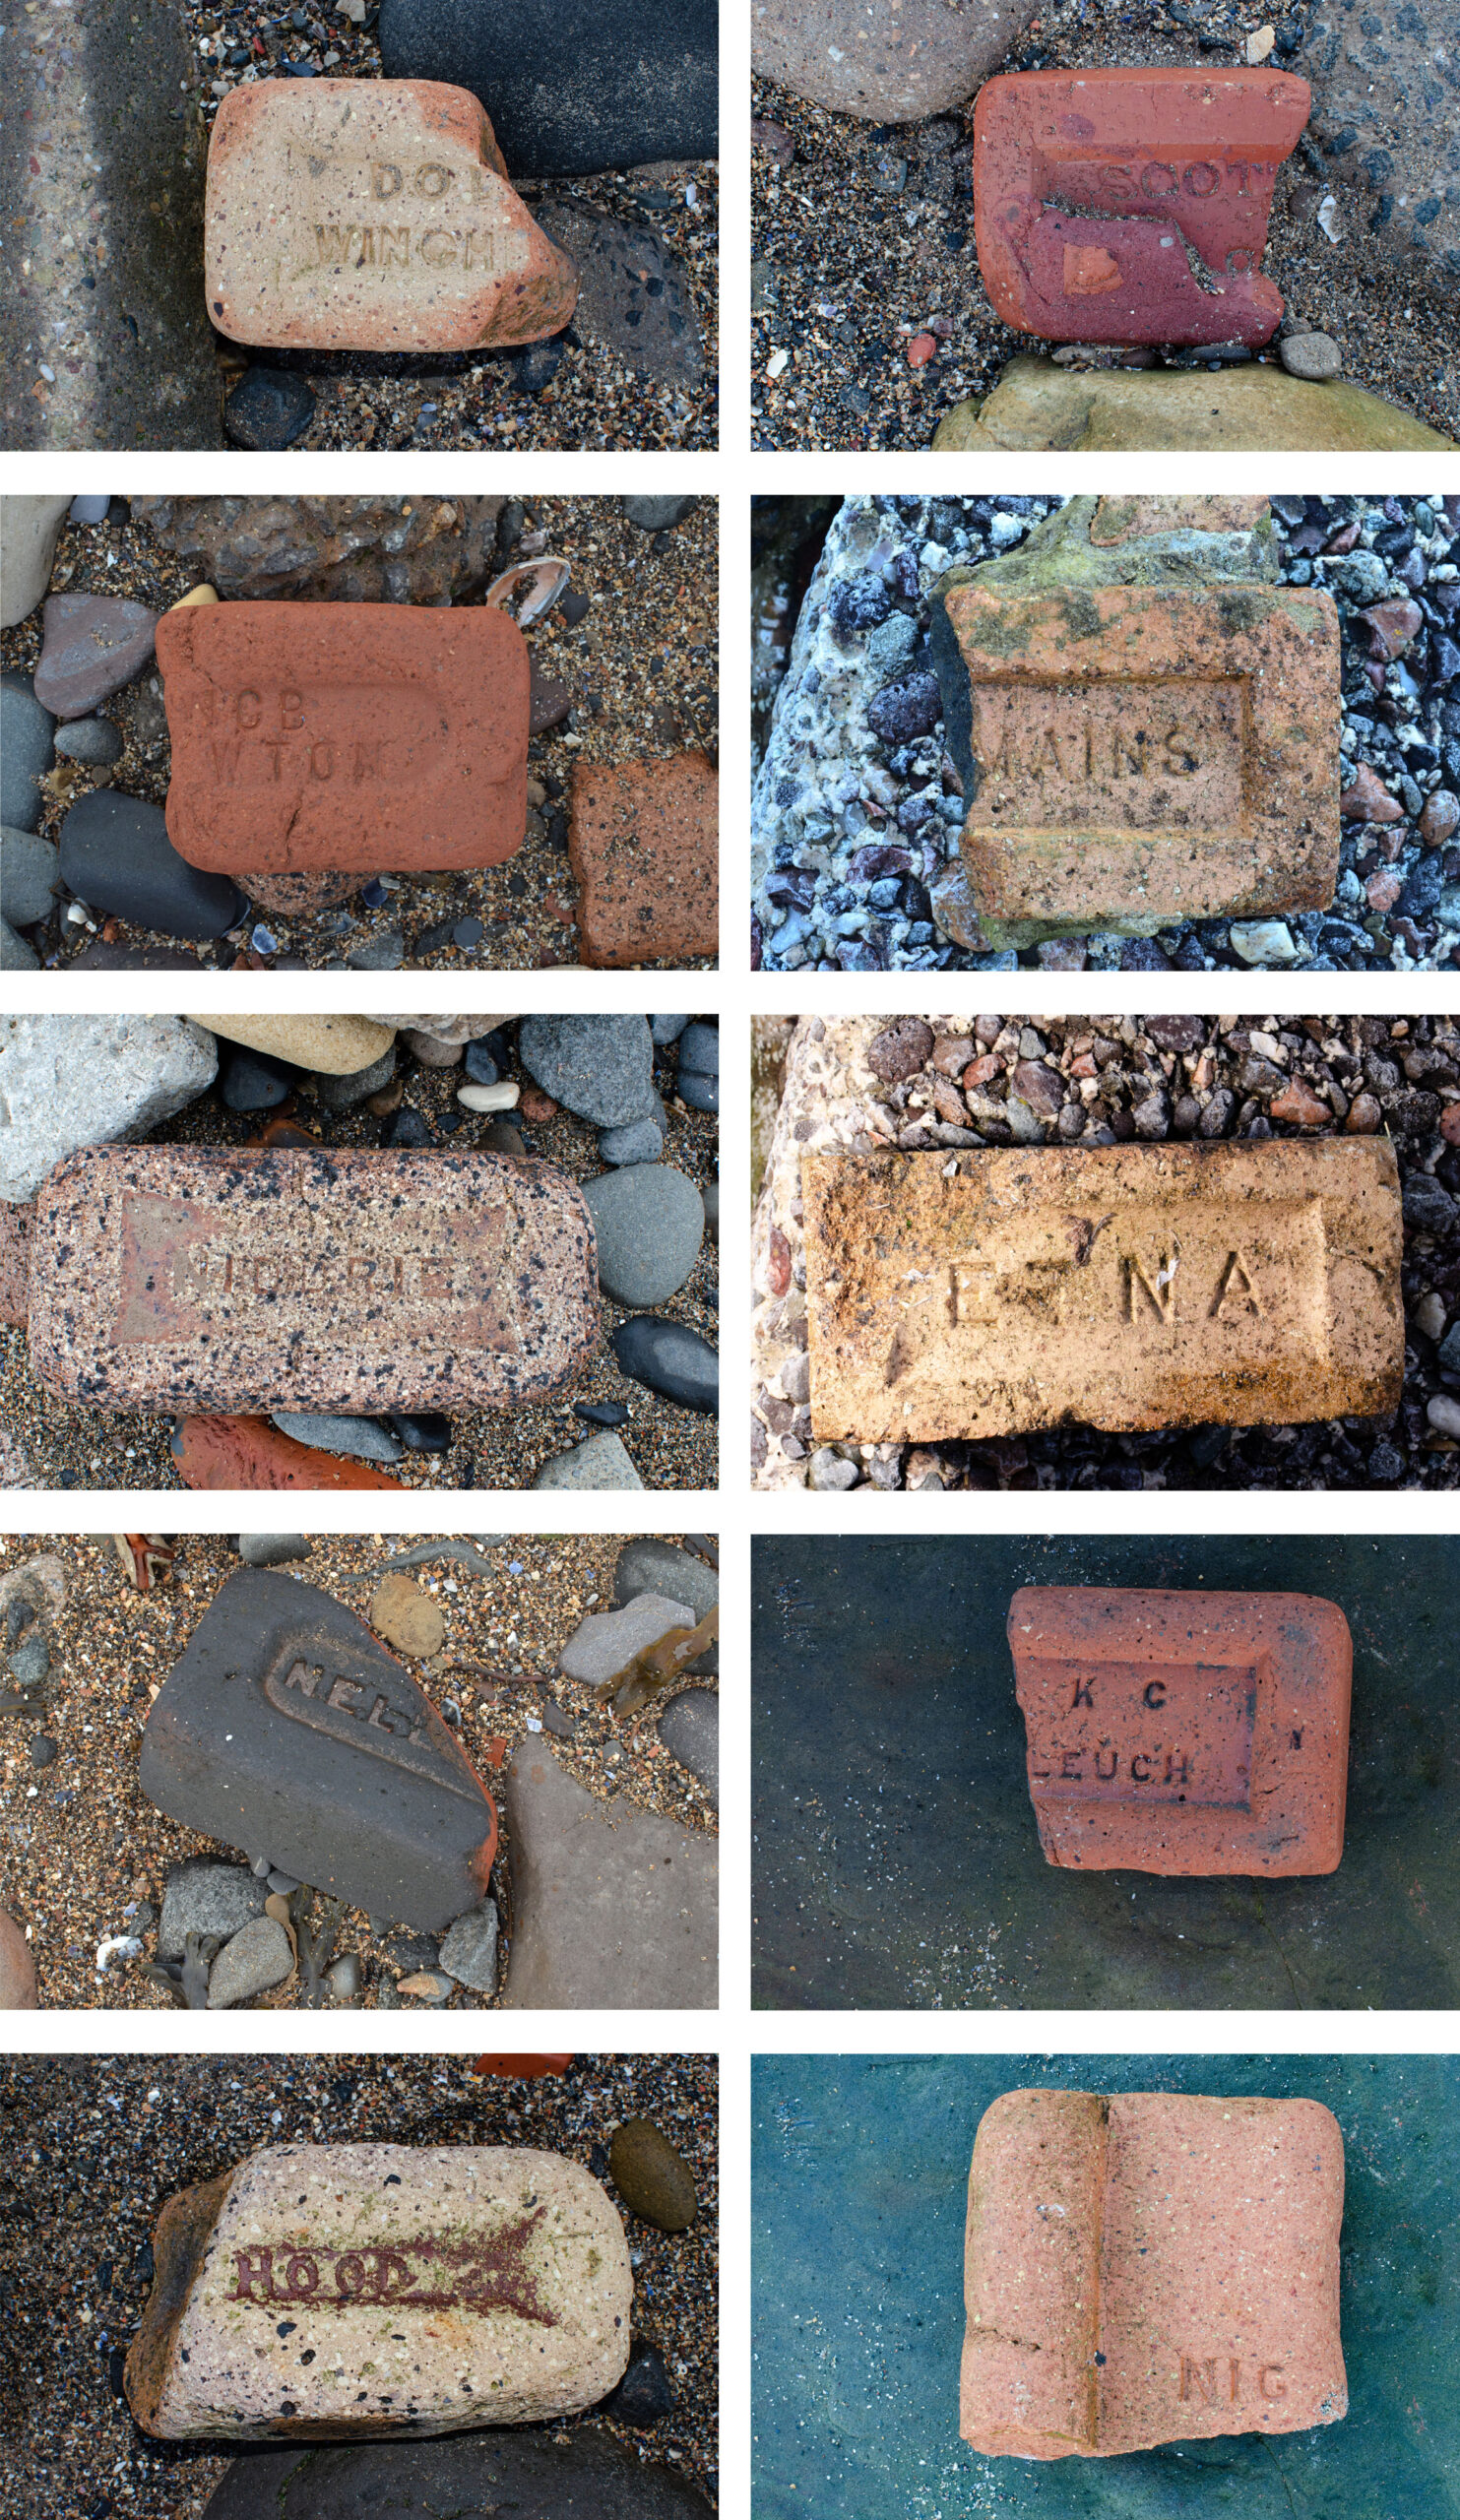 10 photos of whoel and partial bricks arranged in a grid. Each brick is stamped, some are only partially readable. The stamps are as follows, form top left, clockwise: DOU... WINCH...; SCOT... ; ...MAINS; ERNA; ..KC ...LEUCH; NIG...; HOOD; NELL...; NIDDRIE; NCB ...WTON.